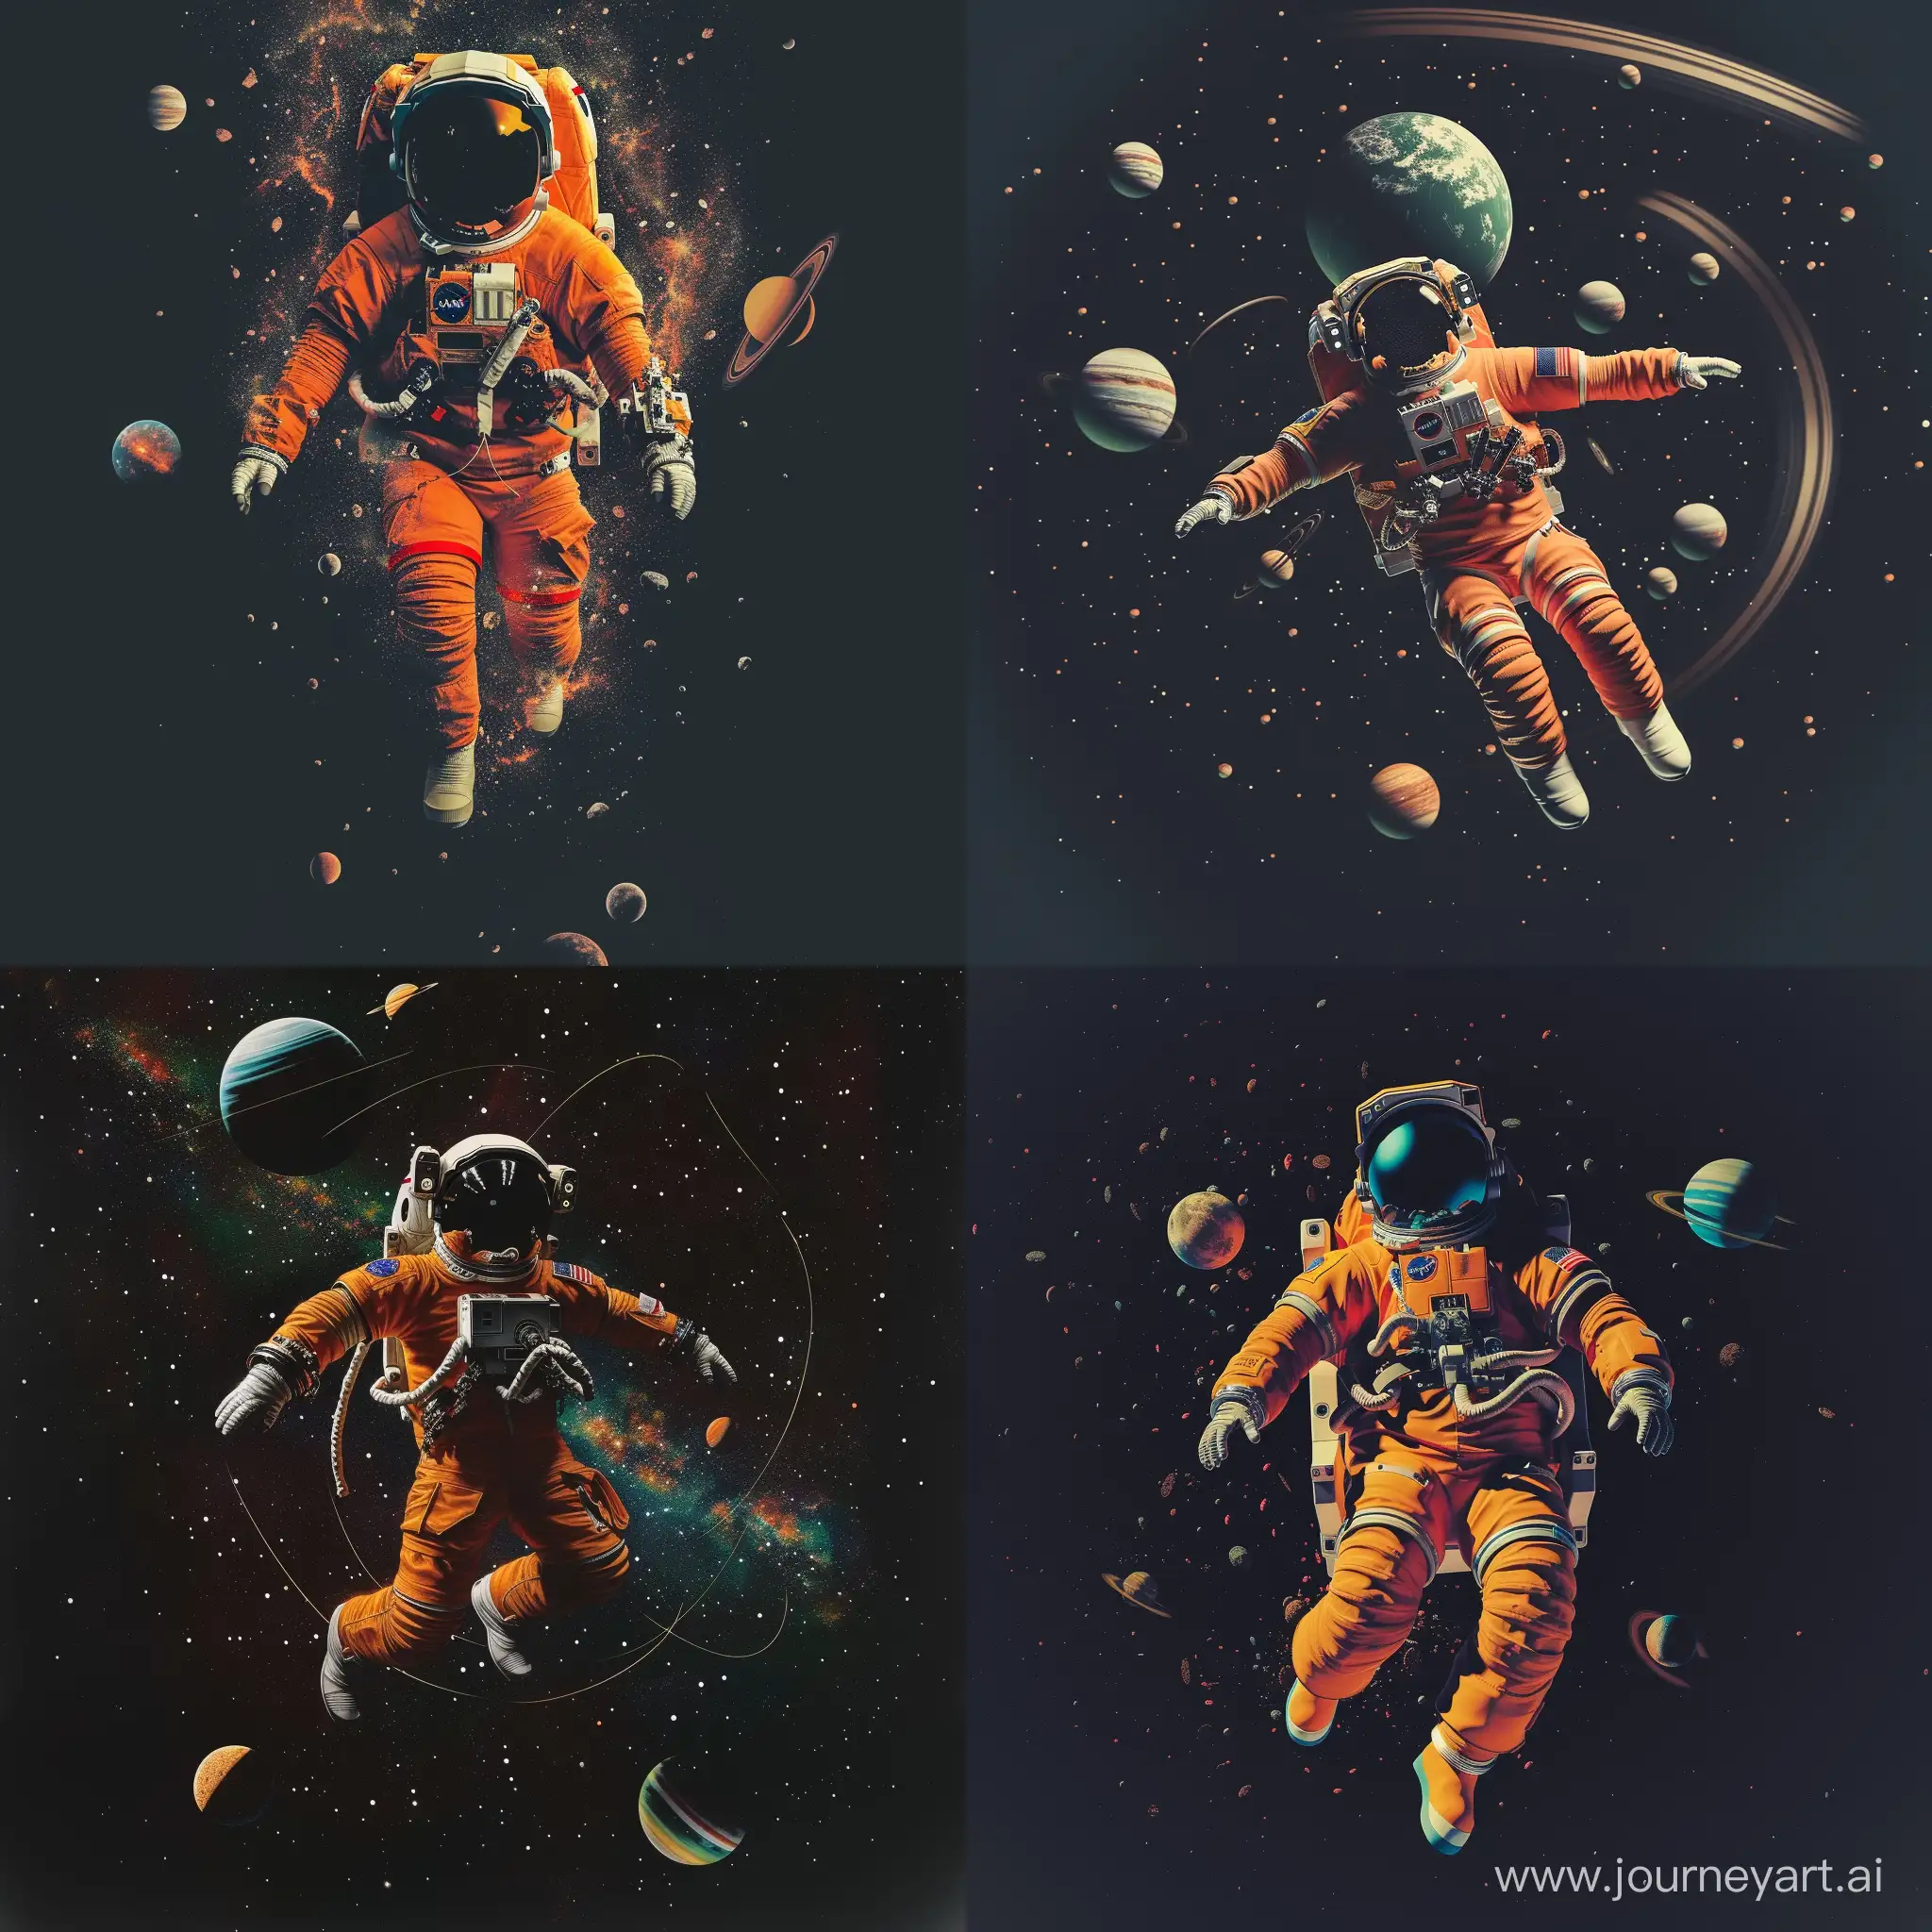 Exploring-Astronaut-Surrounded-by-Orbiting-Planets-in-Vibrant-Space-Scene